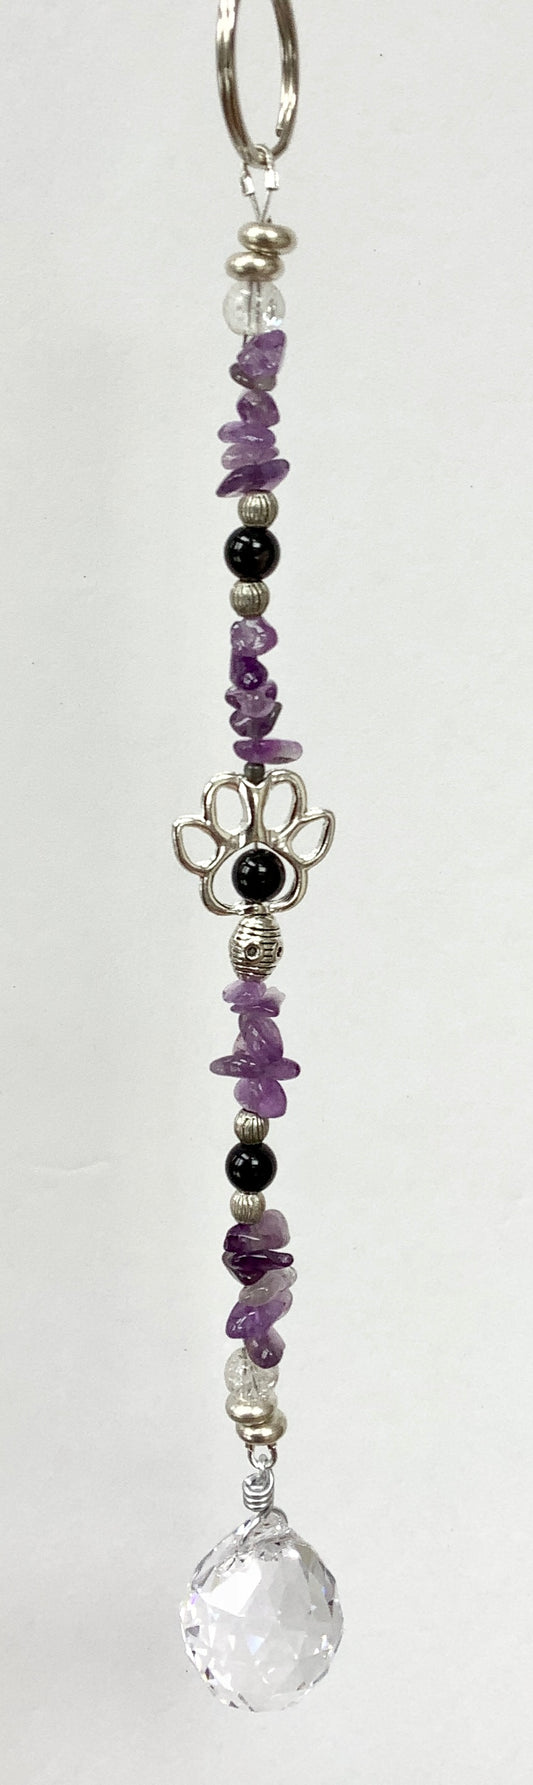 Dog Paw Suncatcher with Amethyst and Obsidian.